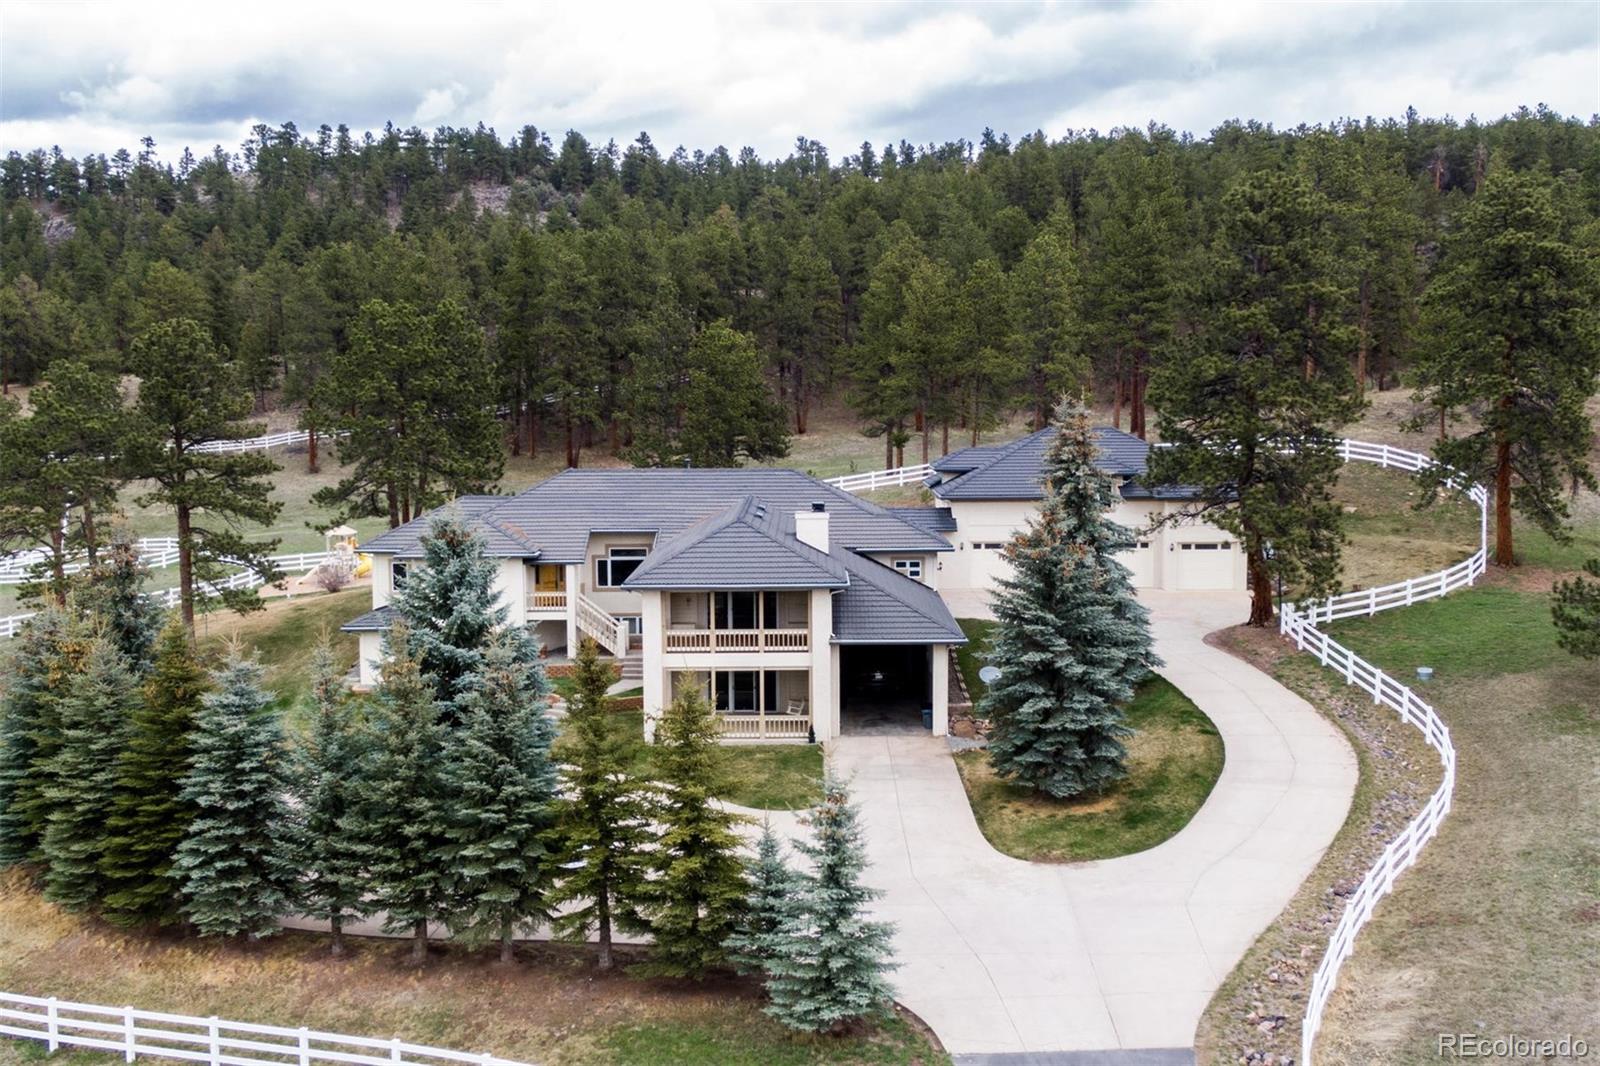 Situated on 22 serene acres, this equestrian estate is private yet convenient to Evergreen shopping and I-70 access.   